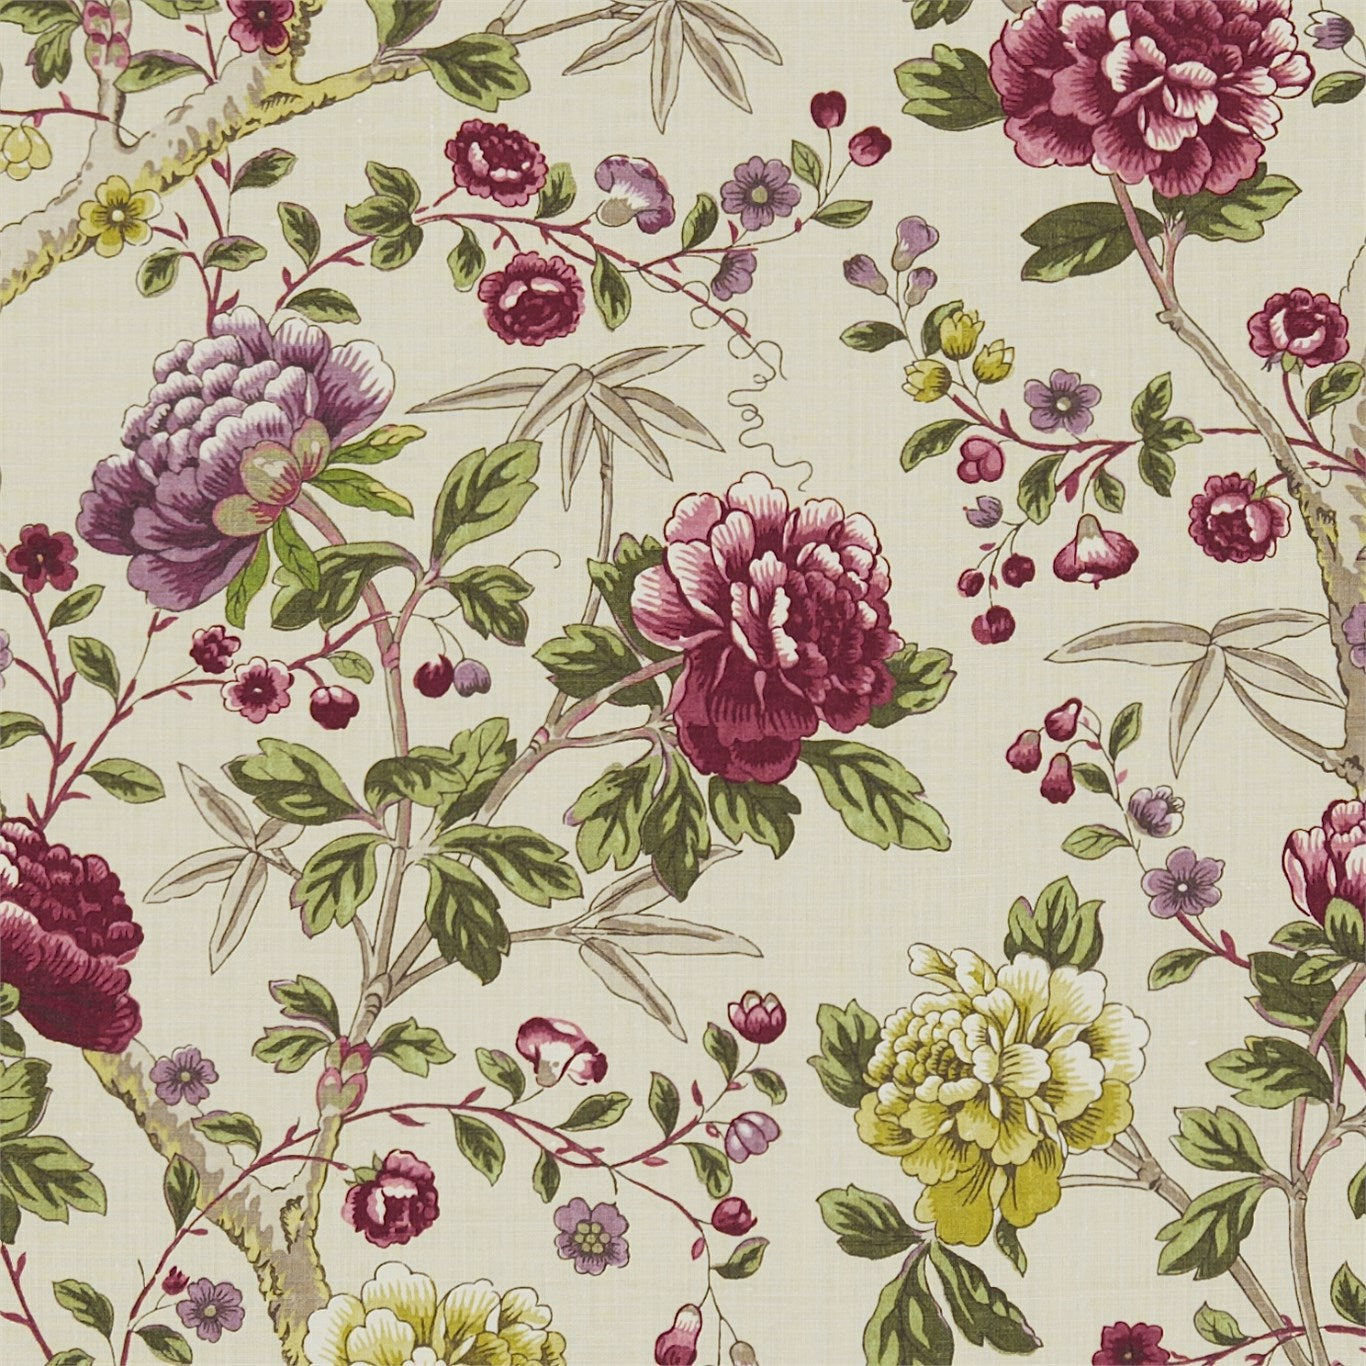 Tangley Fabric by Morris & Co.